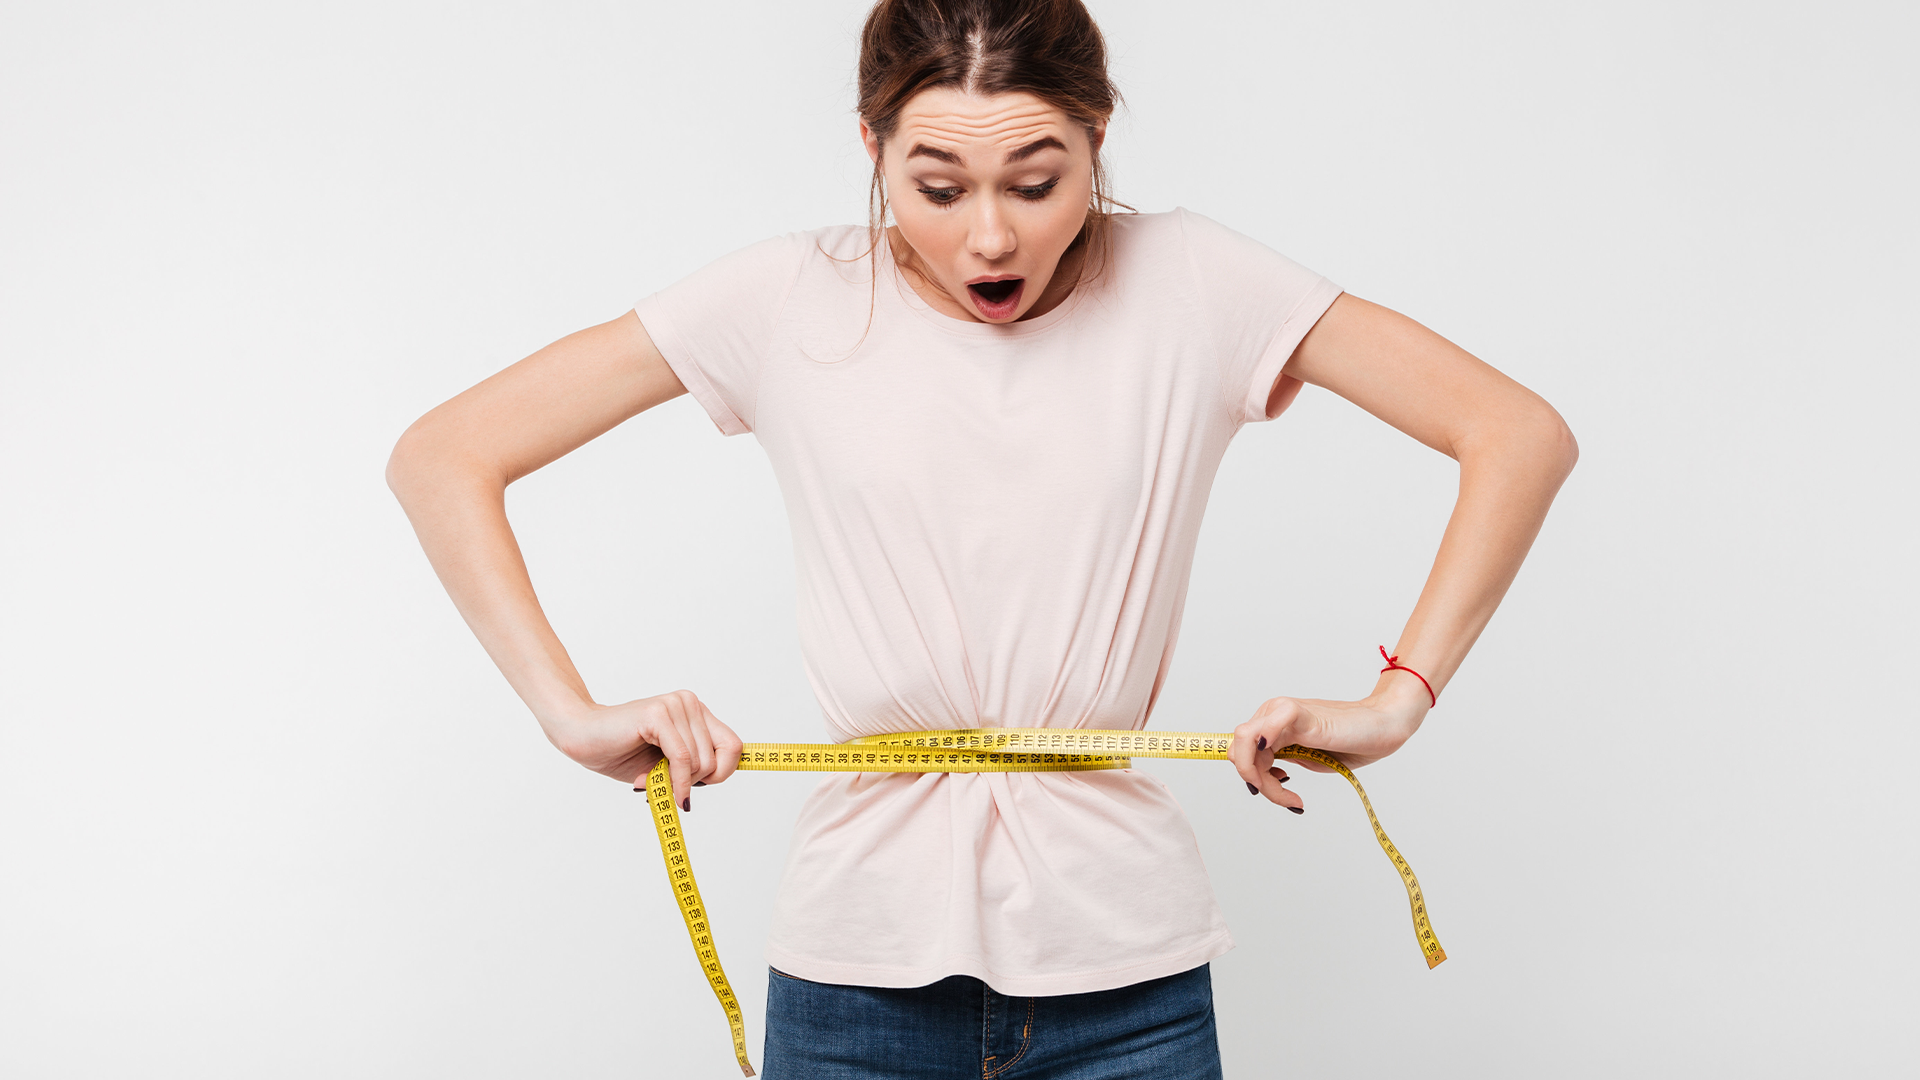 Weight Loss Service Indianapolis